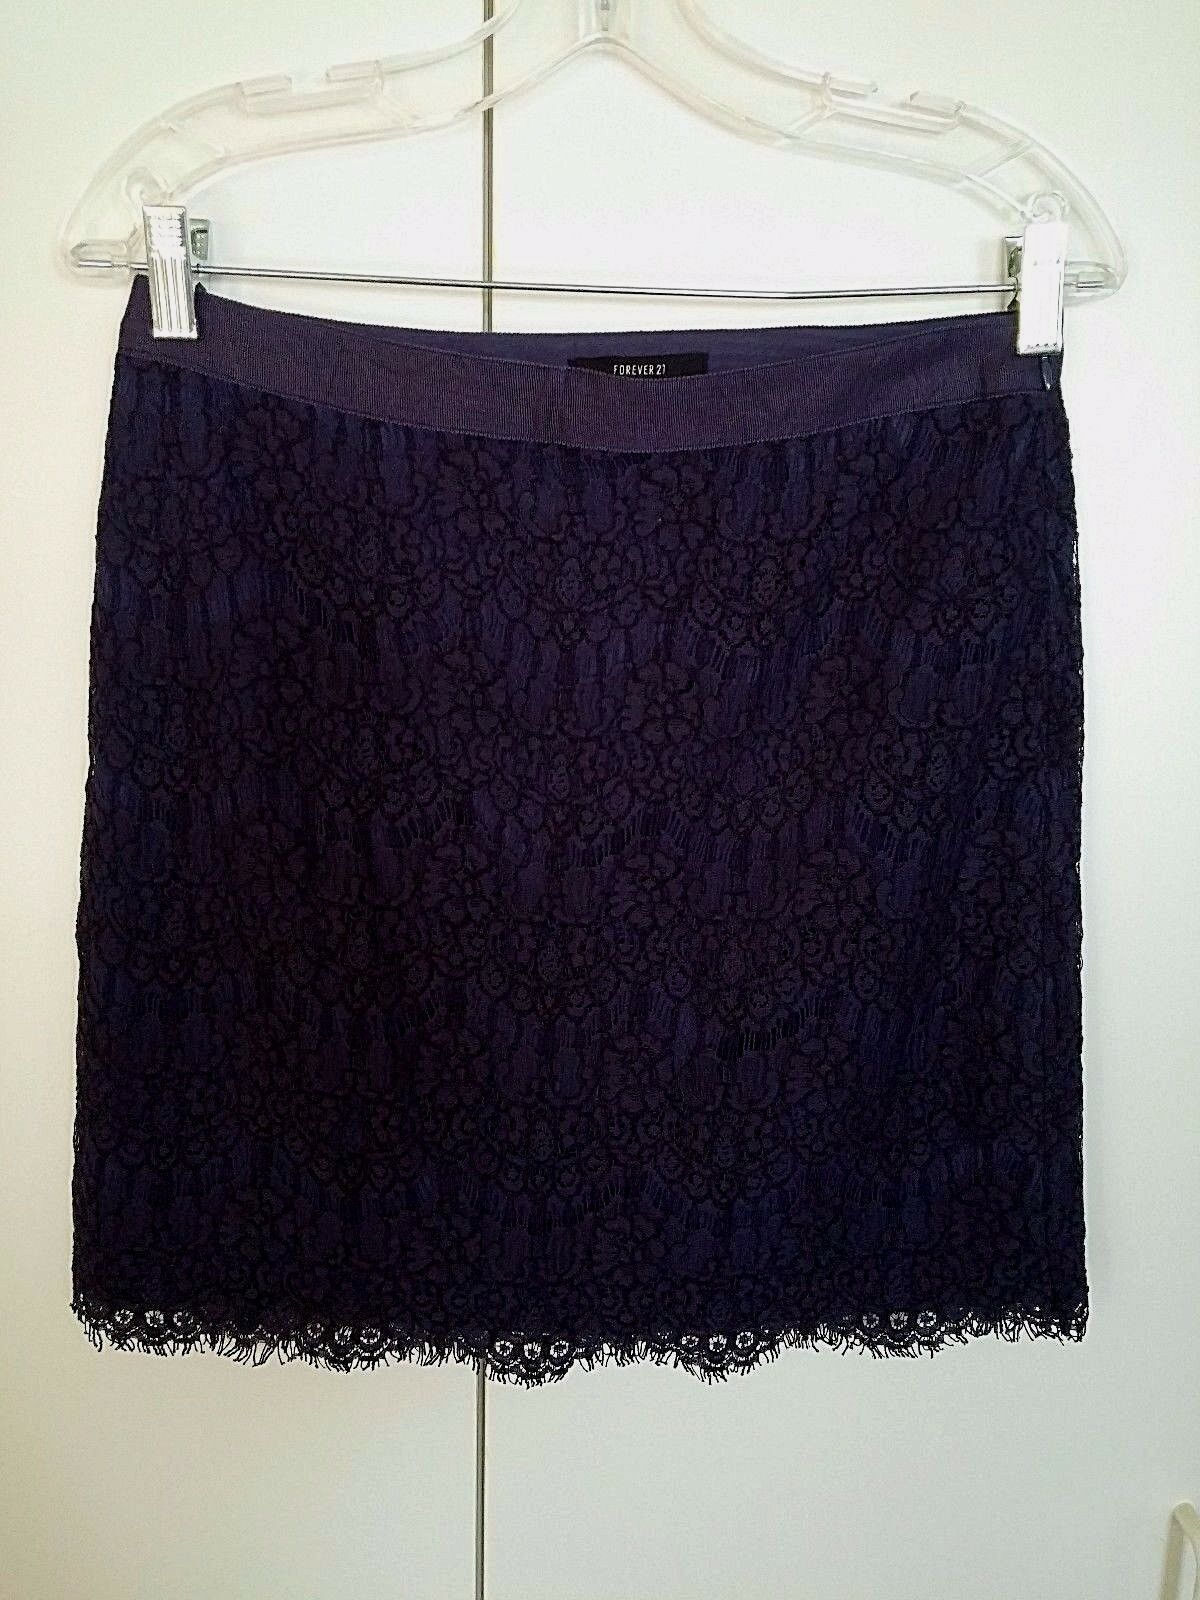 FOREVER 21 LADIES  NAVY LACE MINI-SKIRT-JR M-LINED-RAYON/COTTON/NYLON-WORN ONCE - $4.99